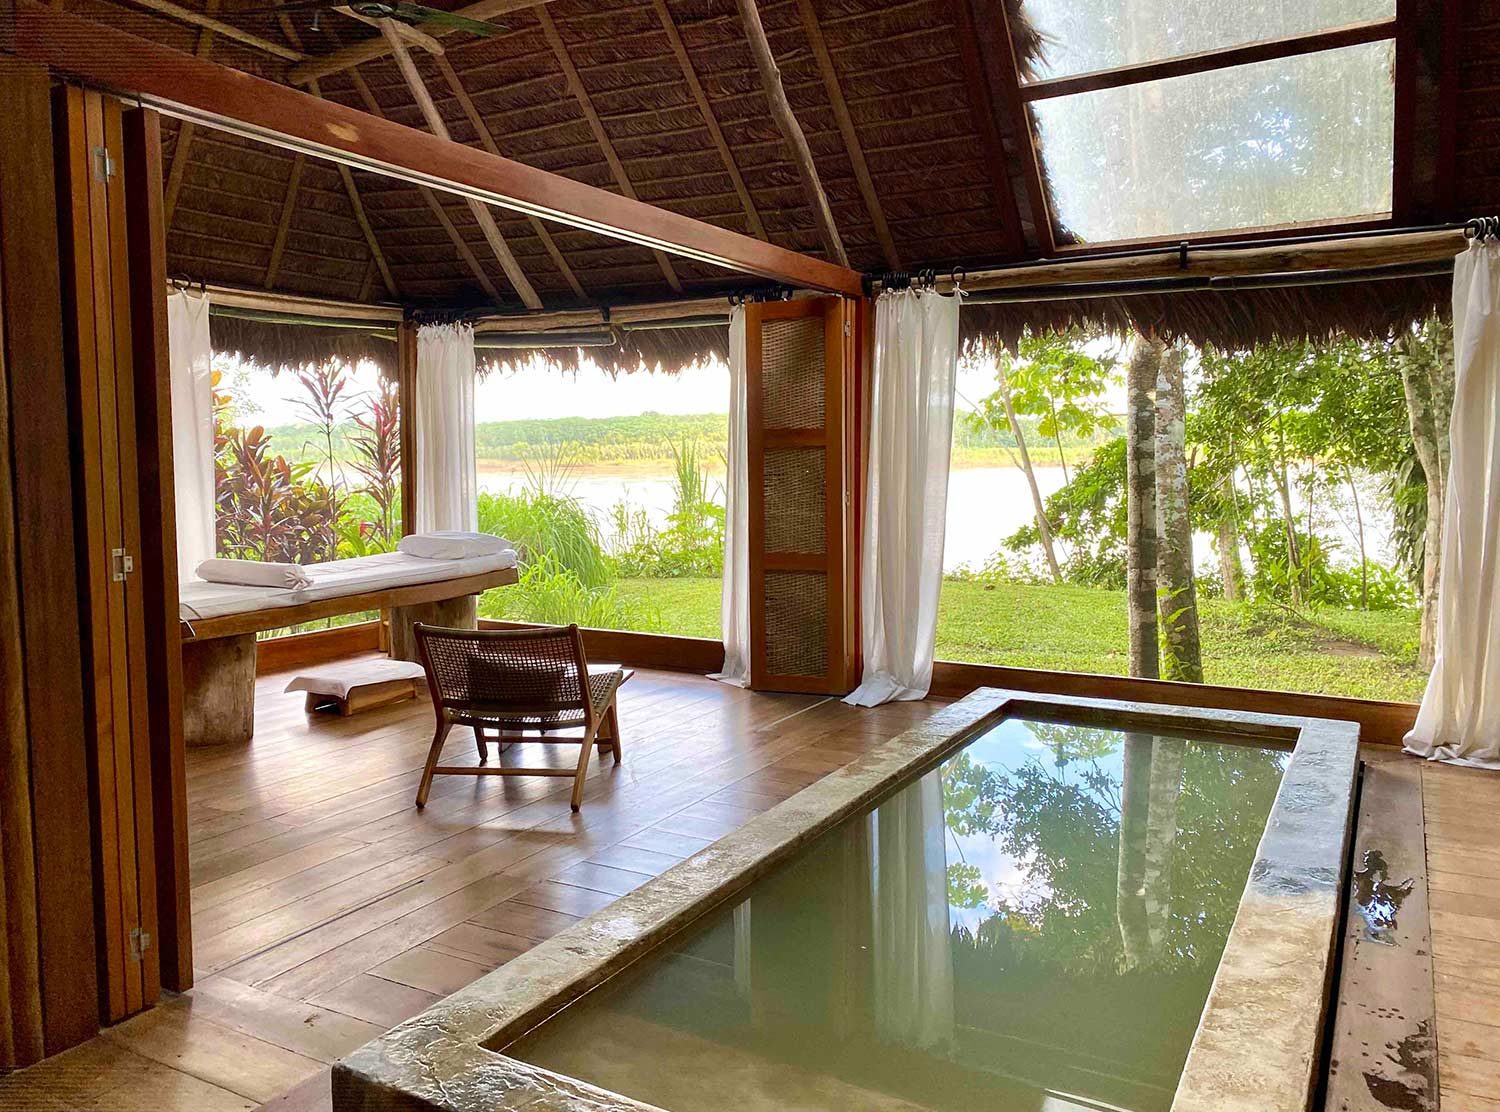 Inkaterra Reserva Amazonica Relaxing and cooling massages, reflexology, plunge pool and more